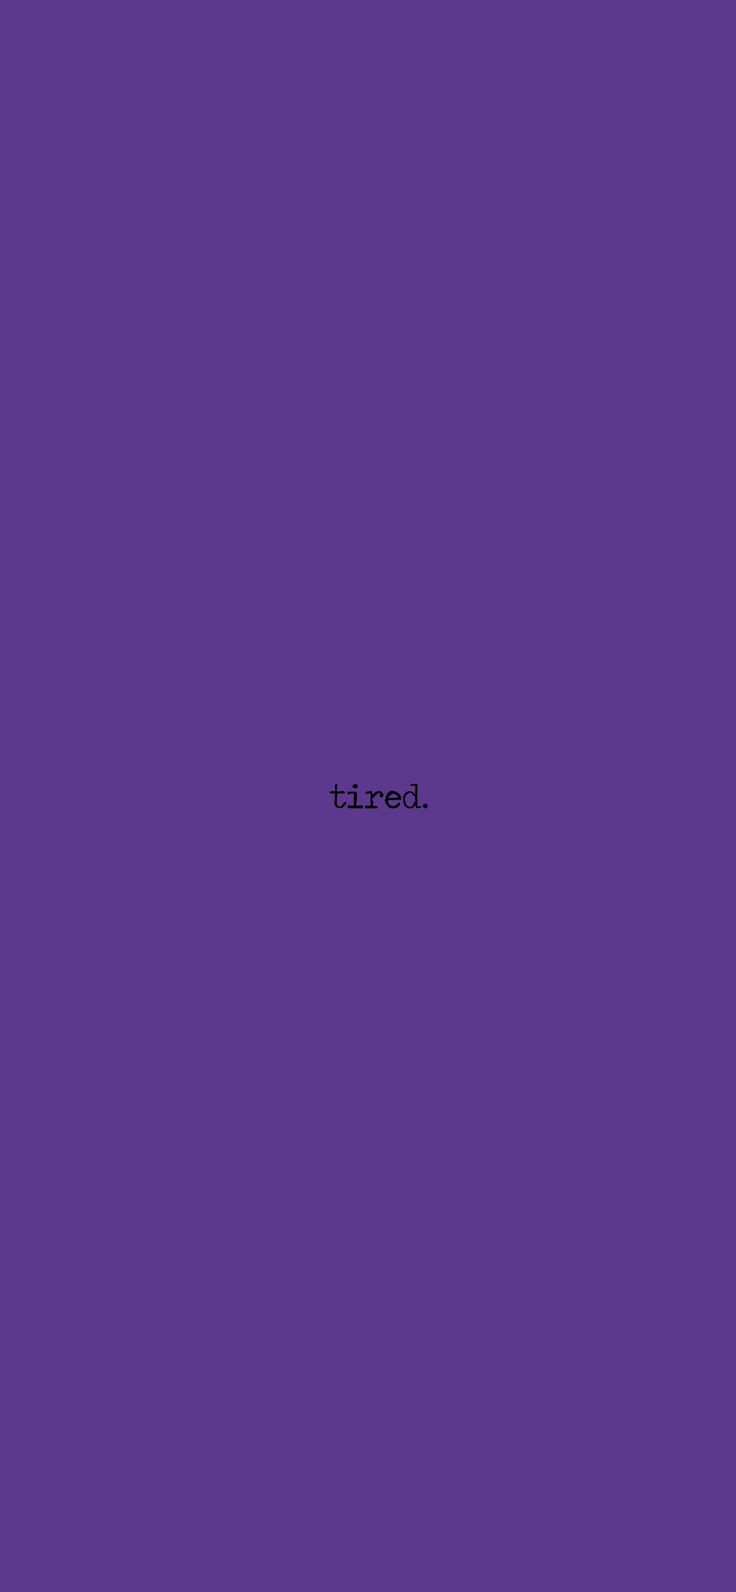 Tired Wallpaper. Quotes, Words, Motivational quotes